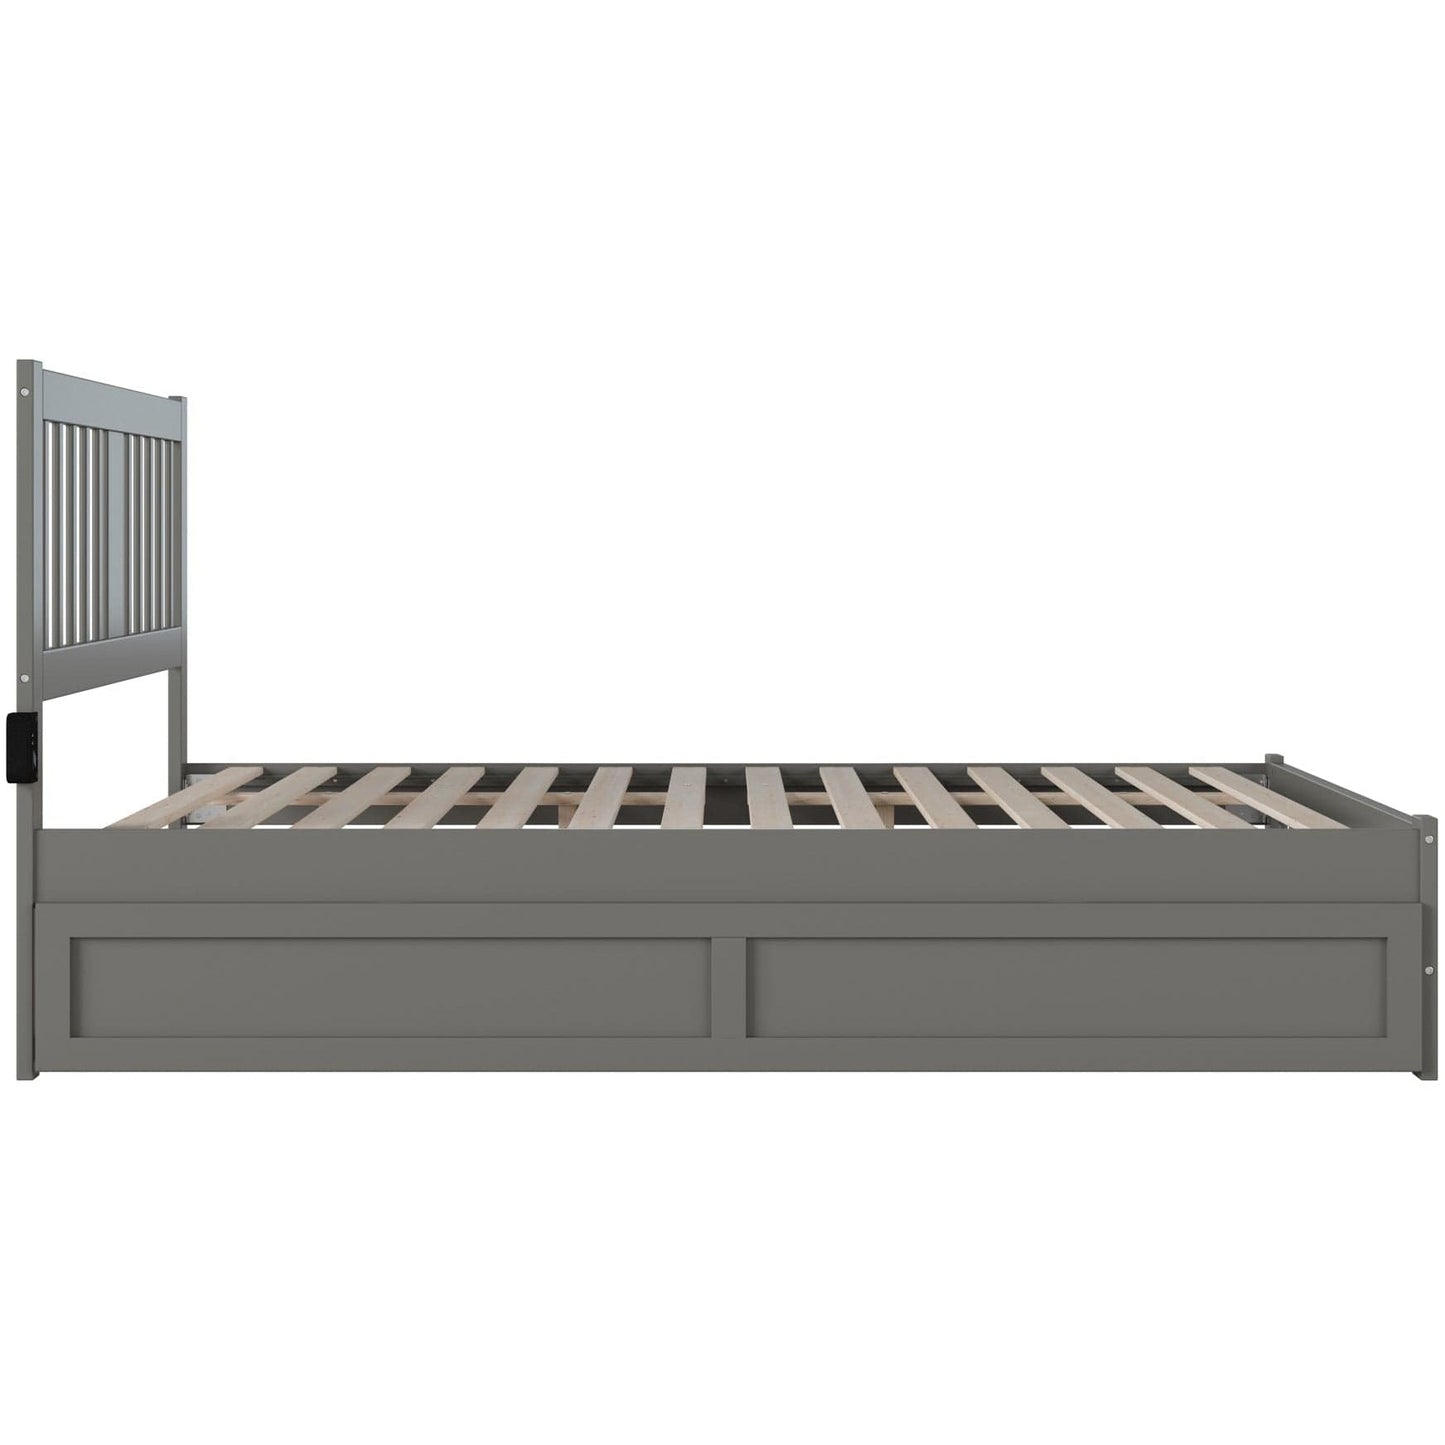 AFI Furnishings Tahoe Queen Bed with Footboard and Twin Extra Long Trundle in Grey AG8961149